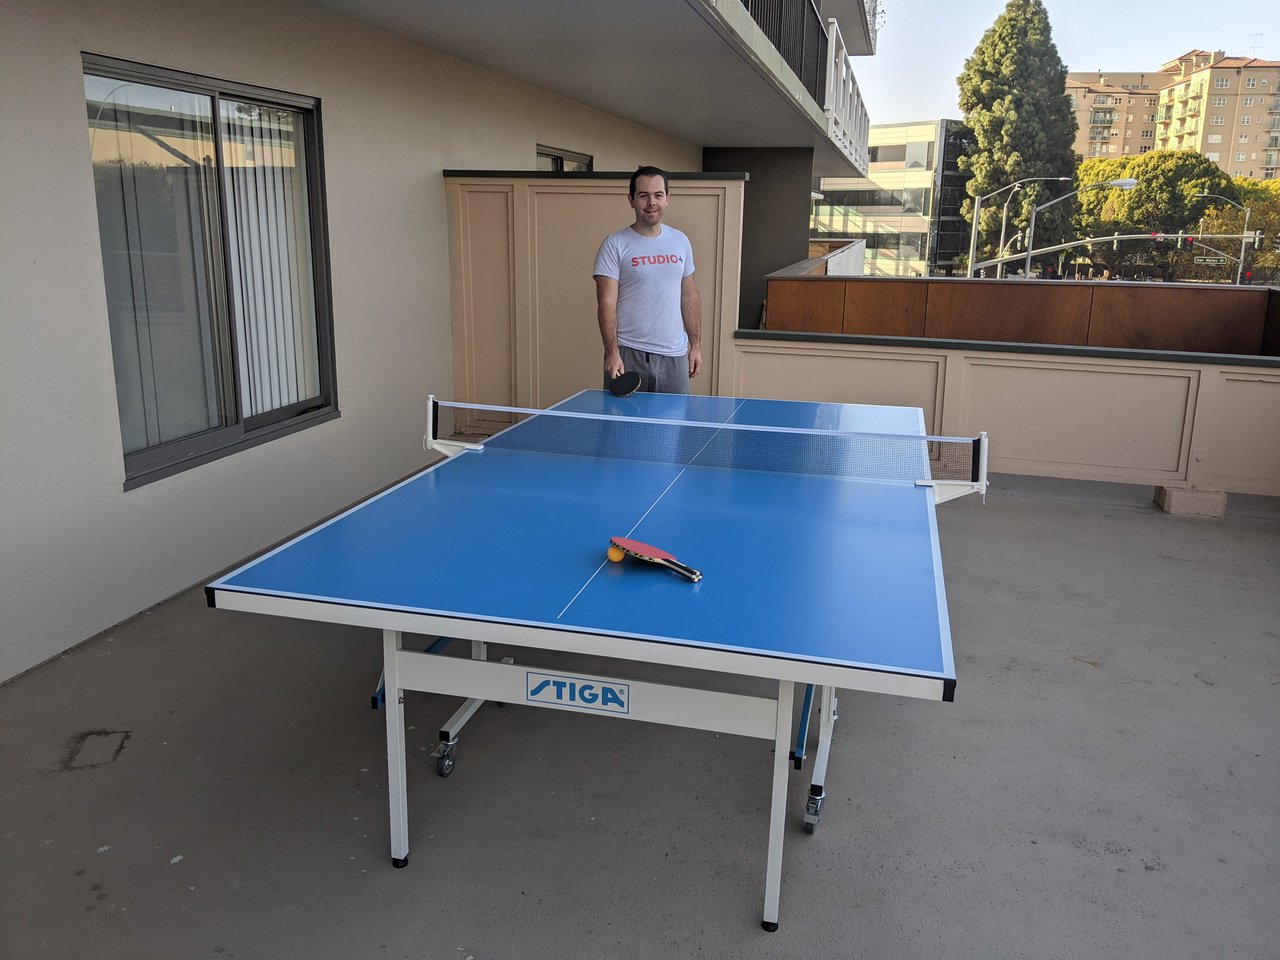 New table tennis table